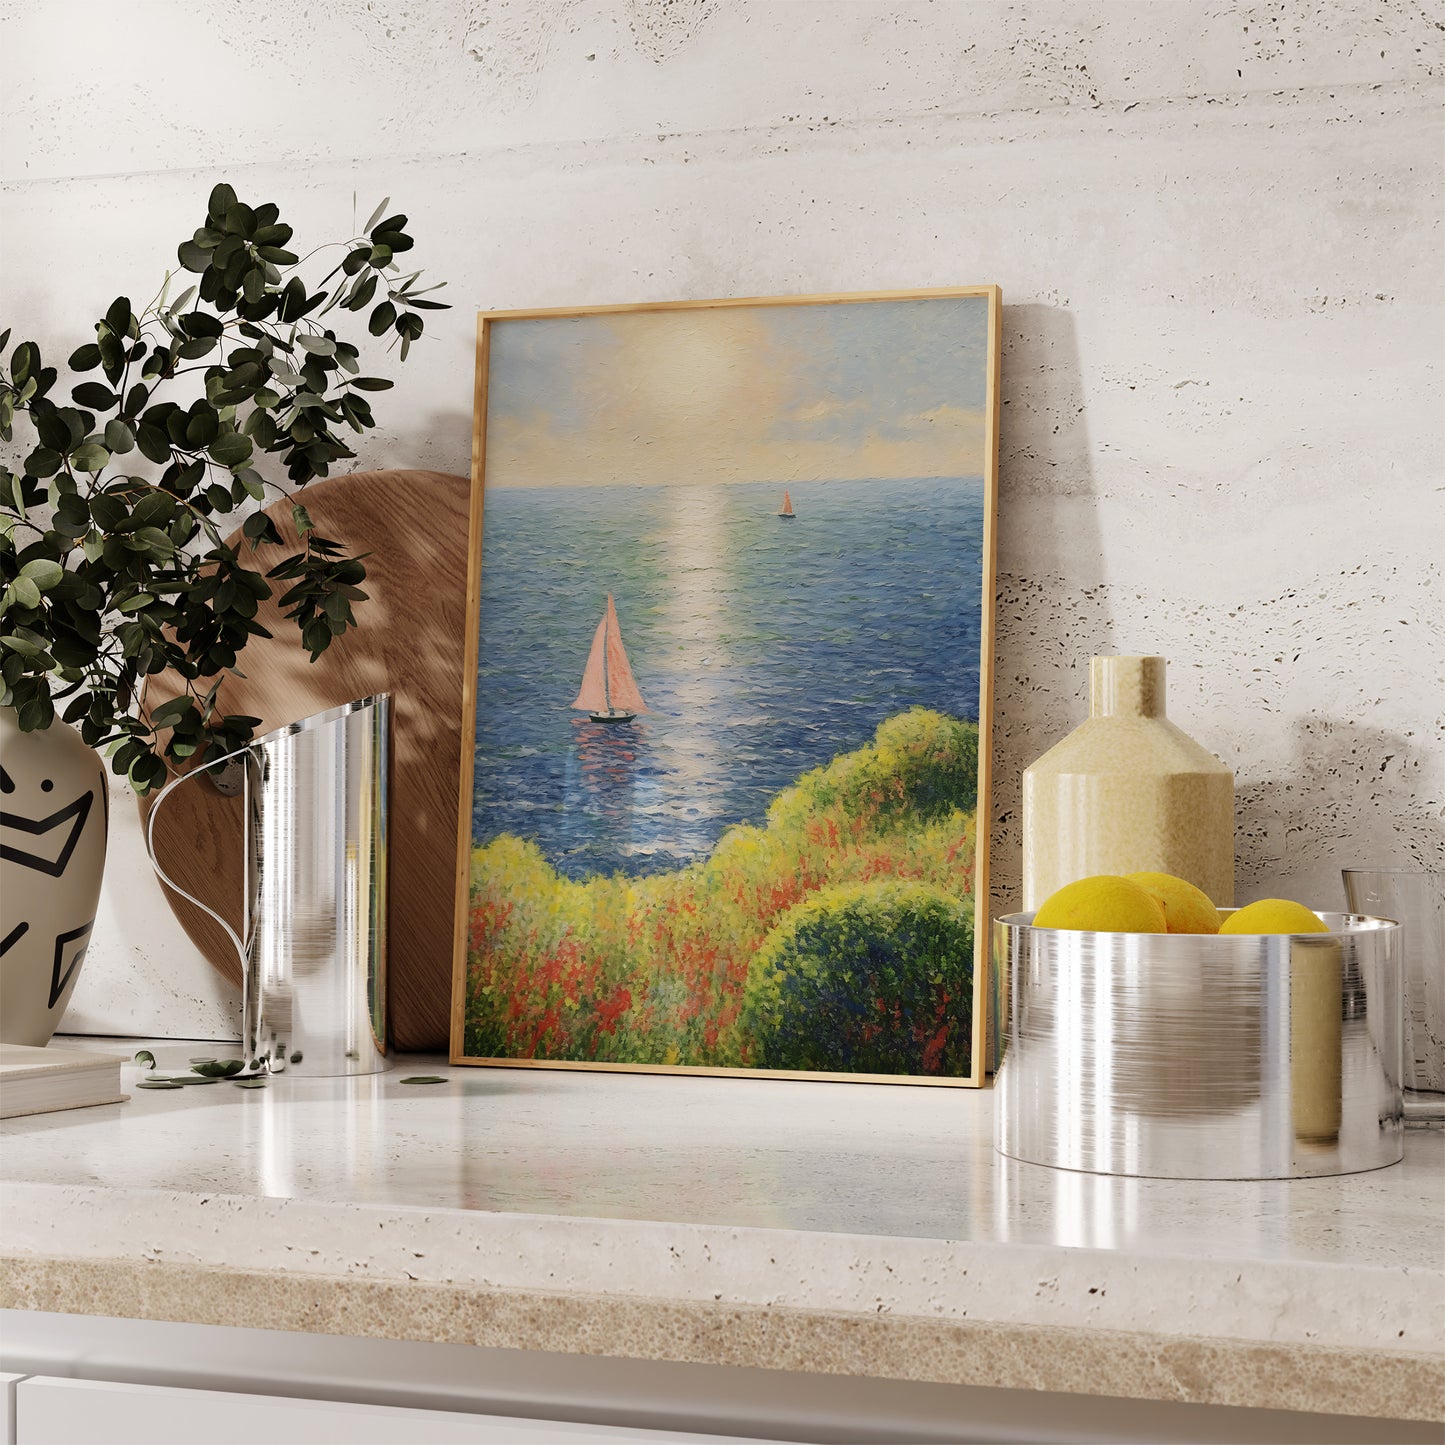 Landscape painting with sailboats on a kitchen counter beside decorative items.